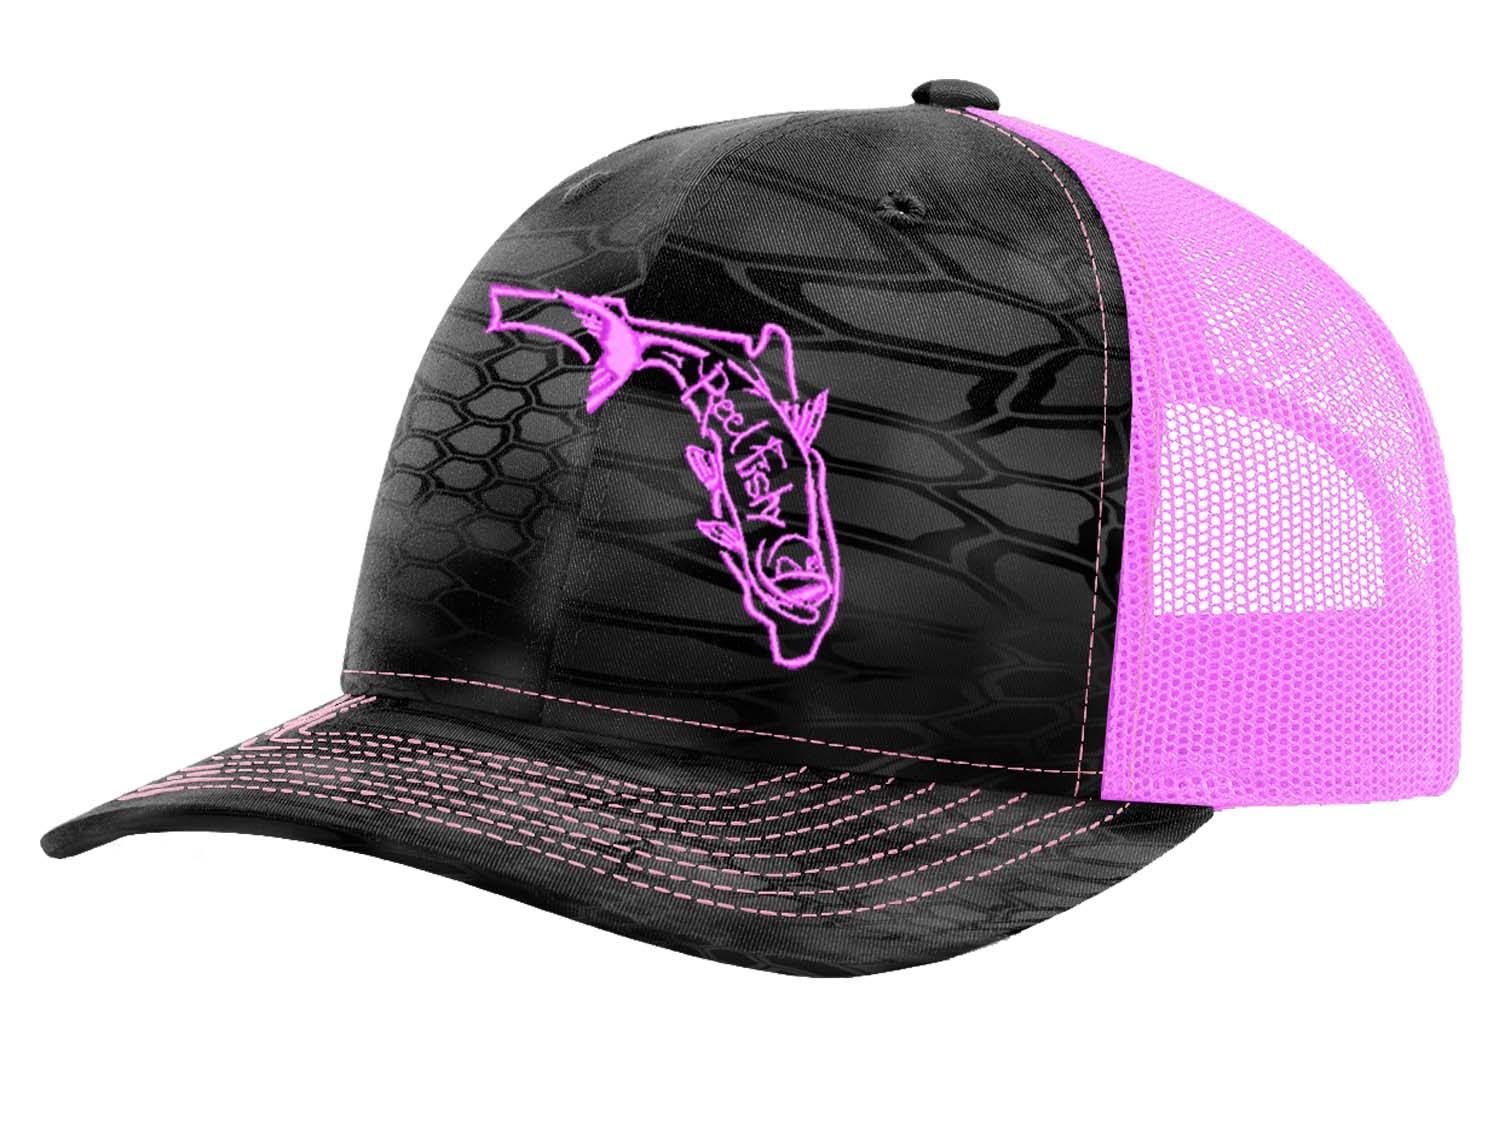 Tarpon Kryptek State of Florida Camo Structured Trucker Hats - 10 Colors! Neon Pink State of fl